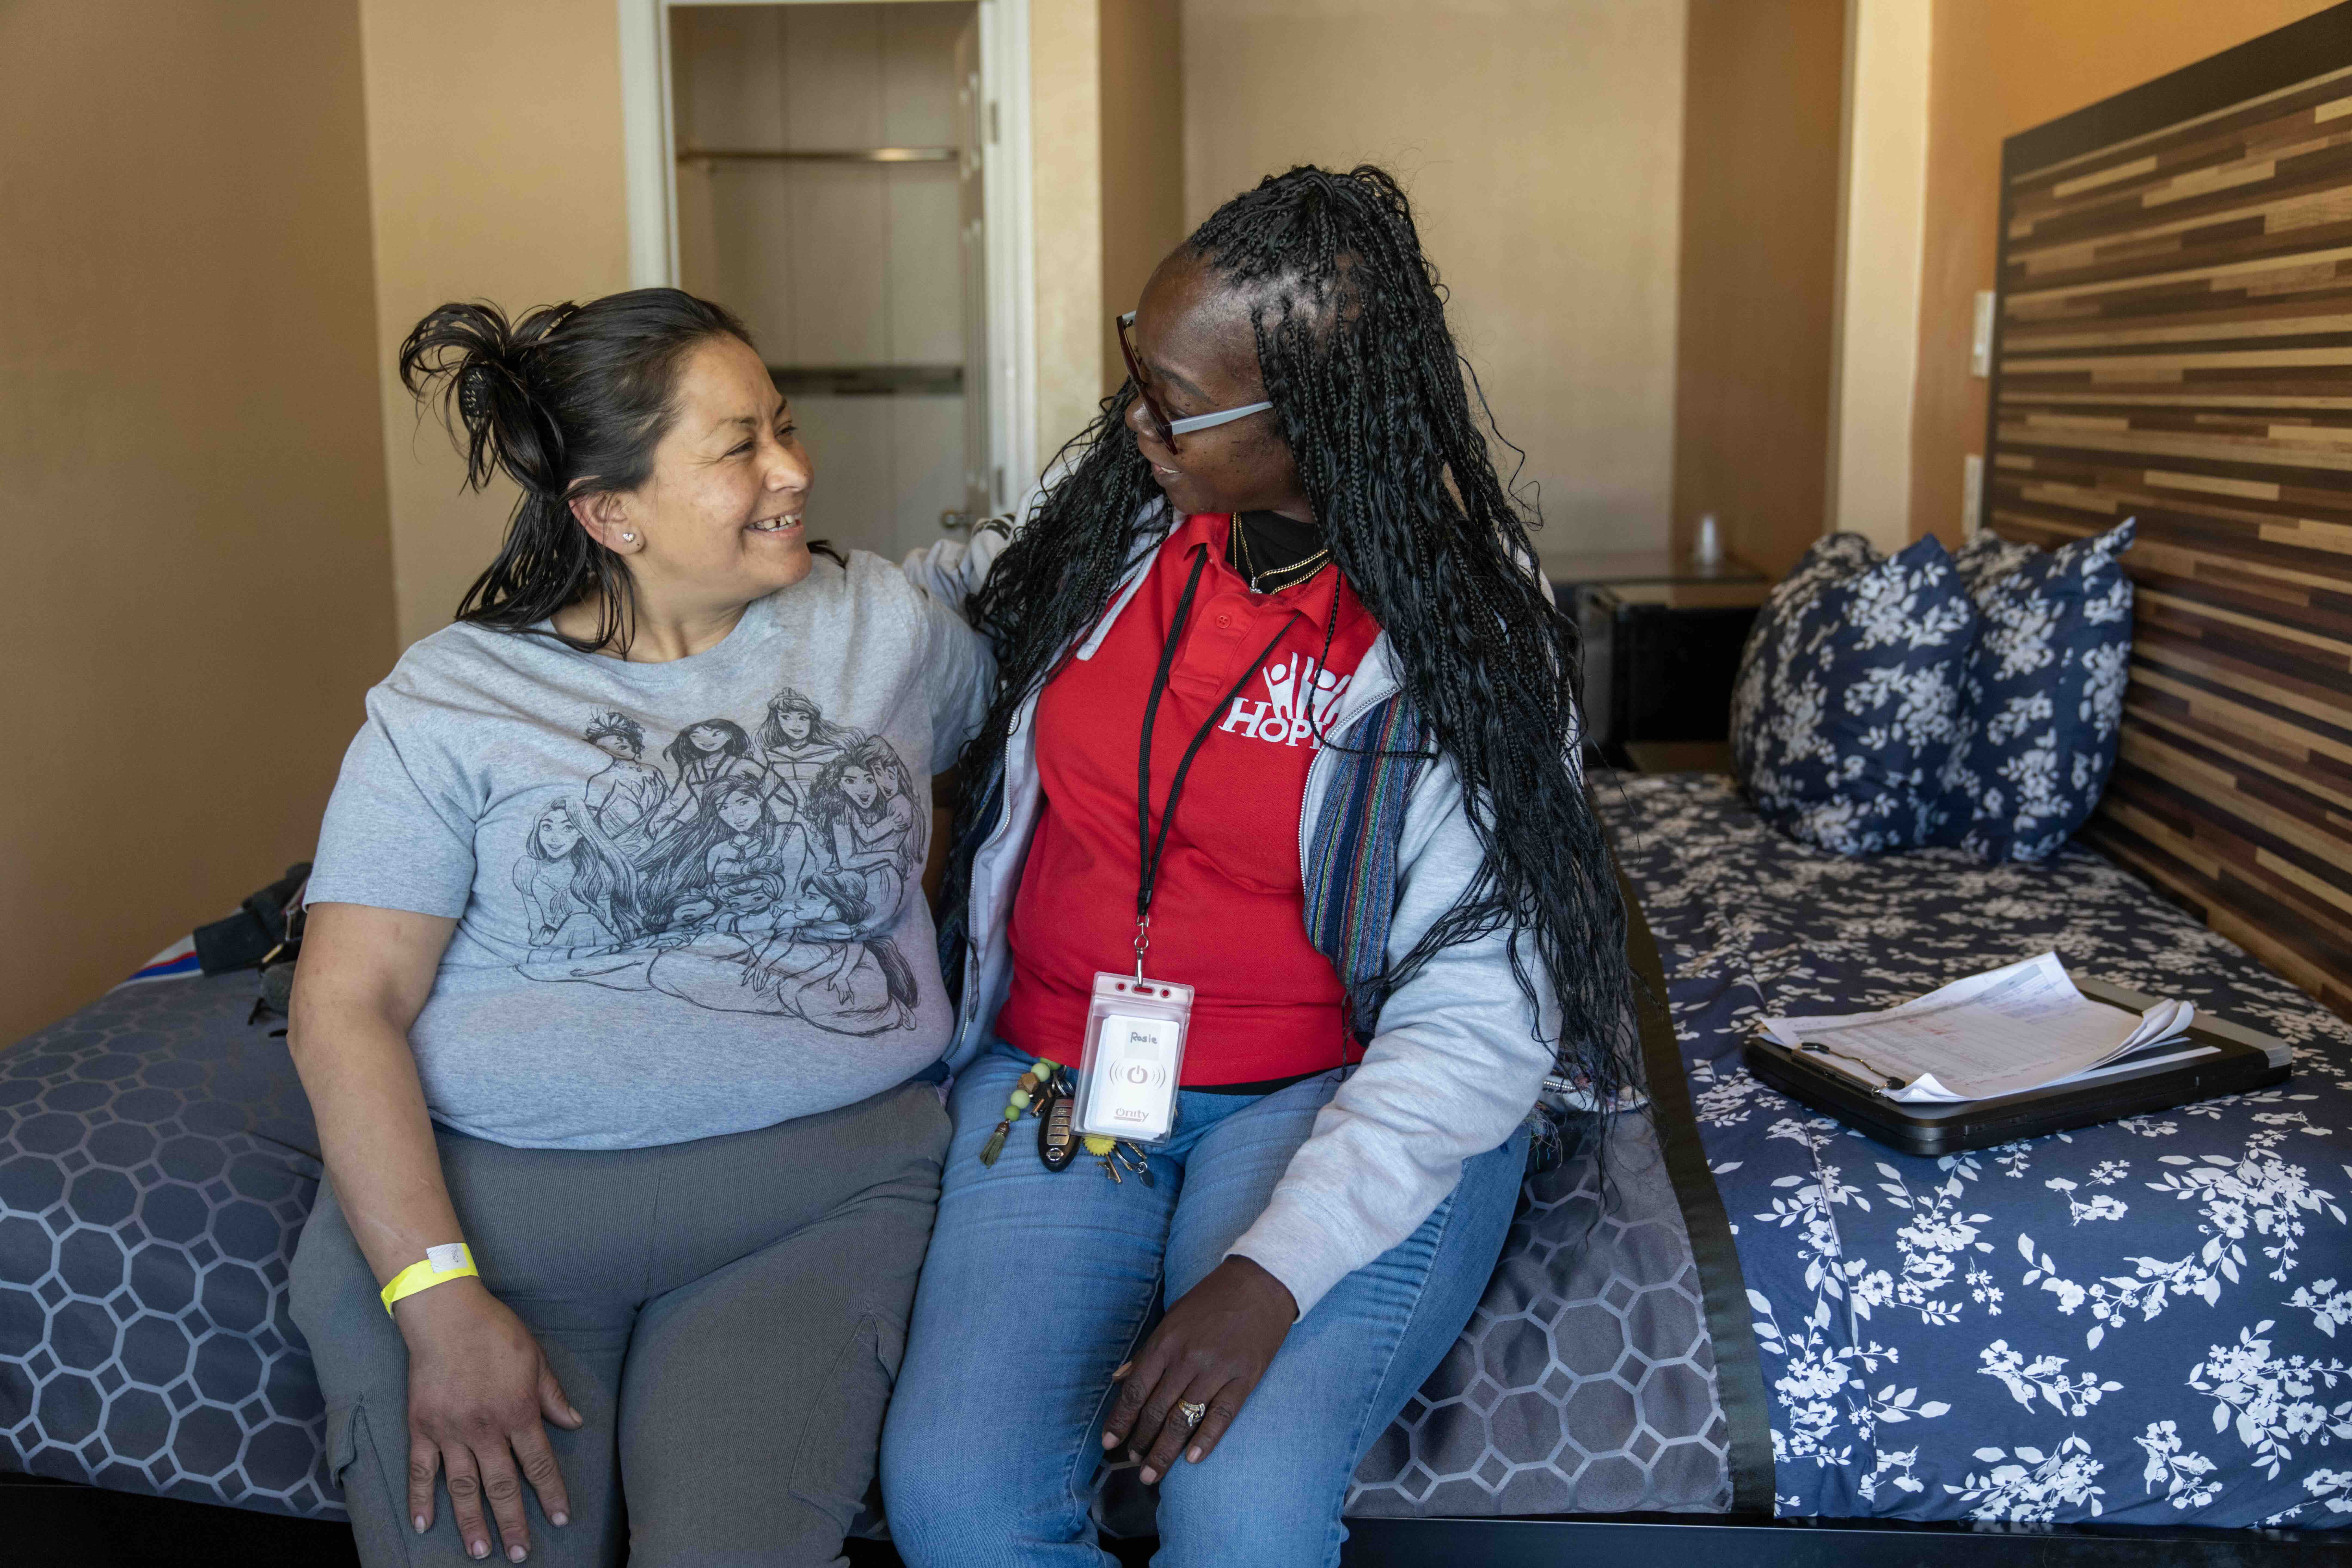 Rosie Atkins with HOPICS, a Pathway Home service provider, left, shows a room to Elsa Jimenez, who had been living under a bridge in Compton until Los Angeles County led a Pathway Home encampment resolution in that community on January 9, 2024. (Mayra Beltran Vasquez / Los Angeles County)